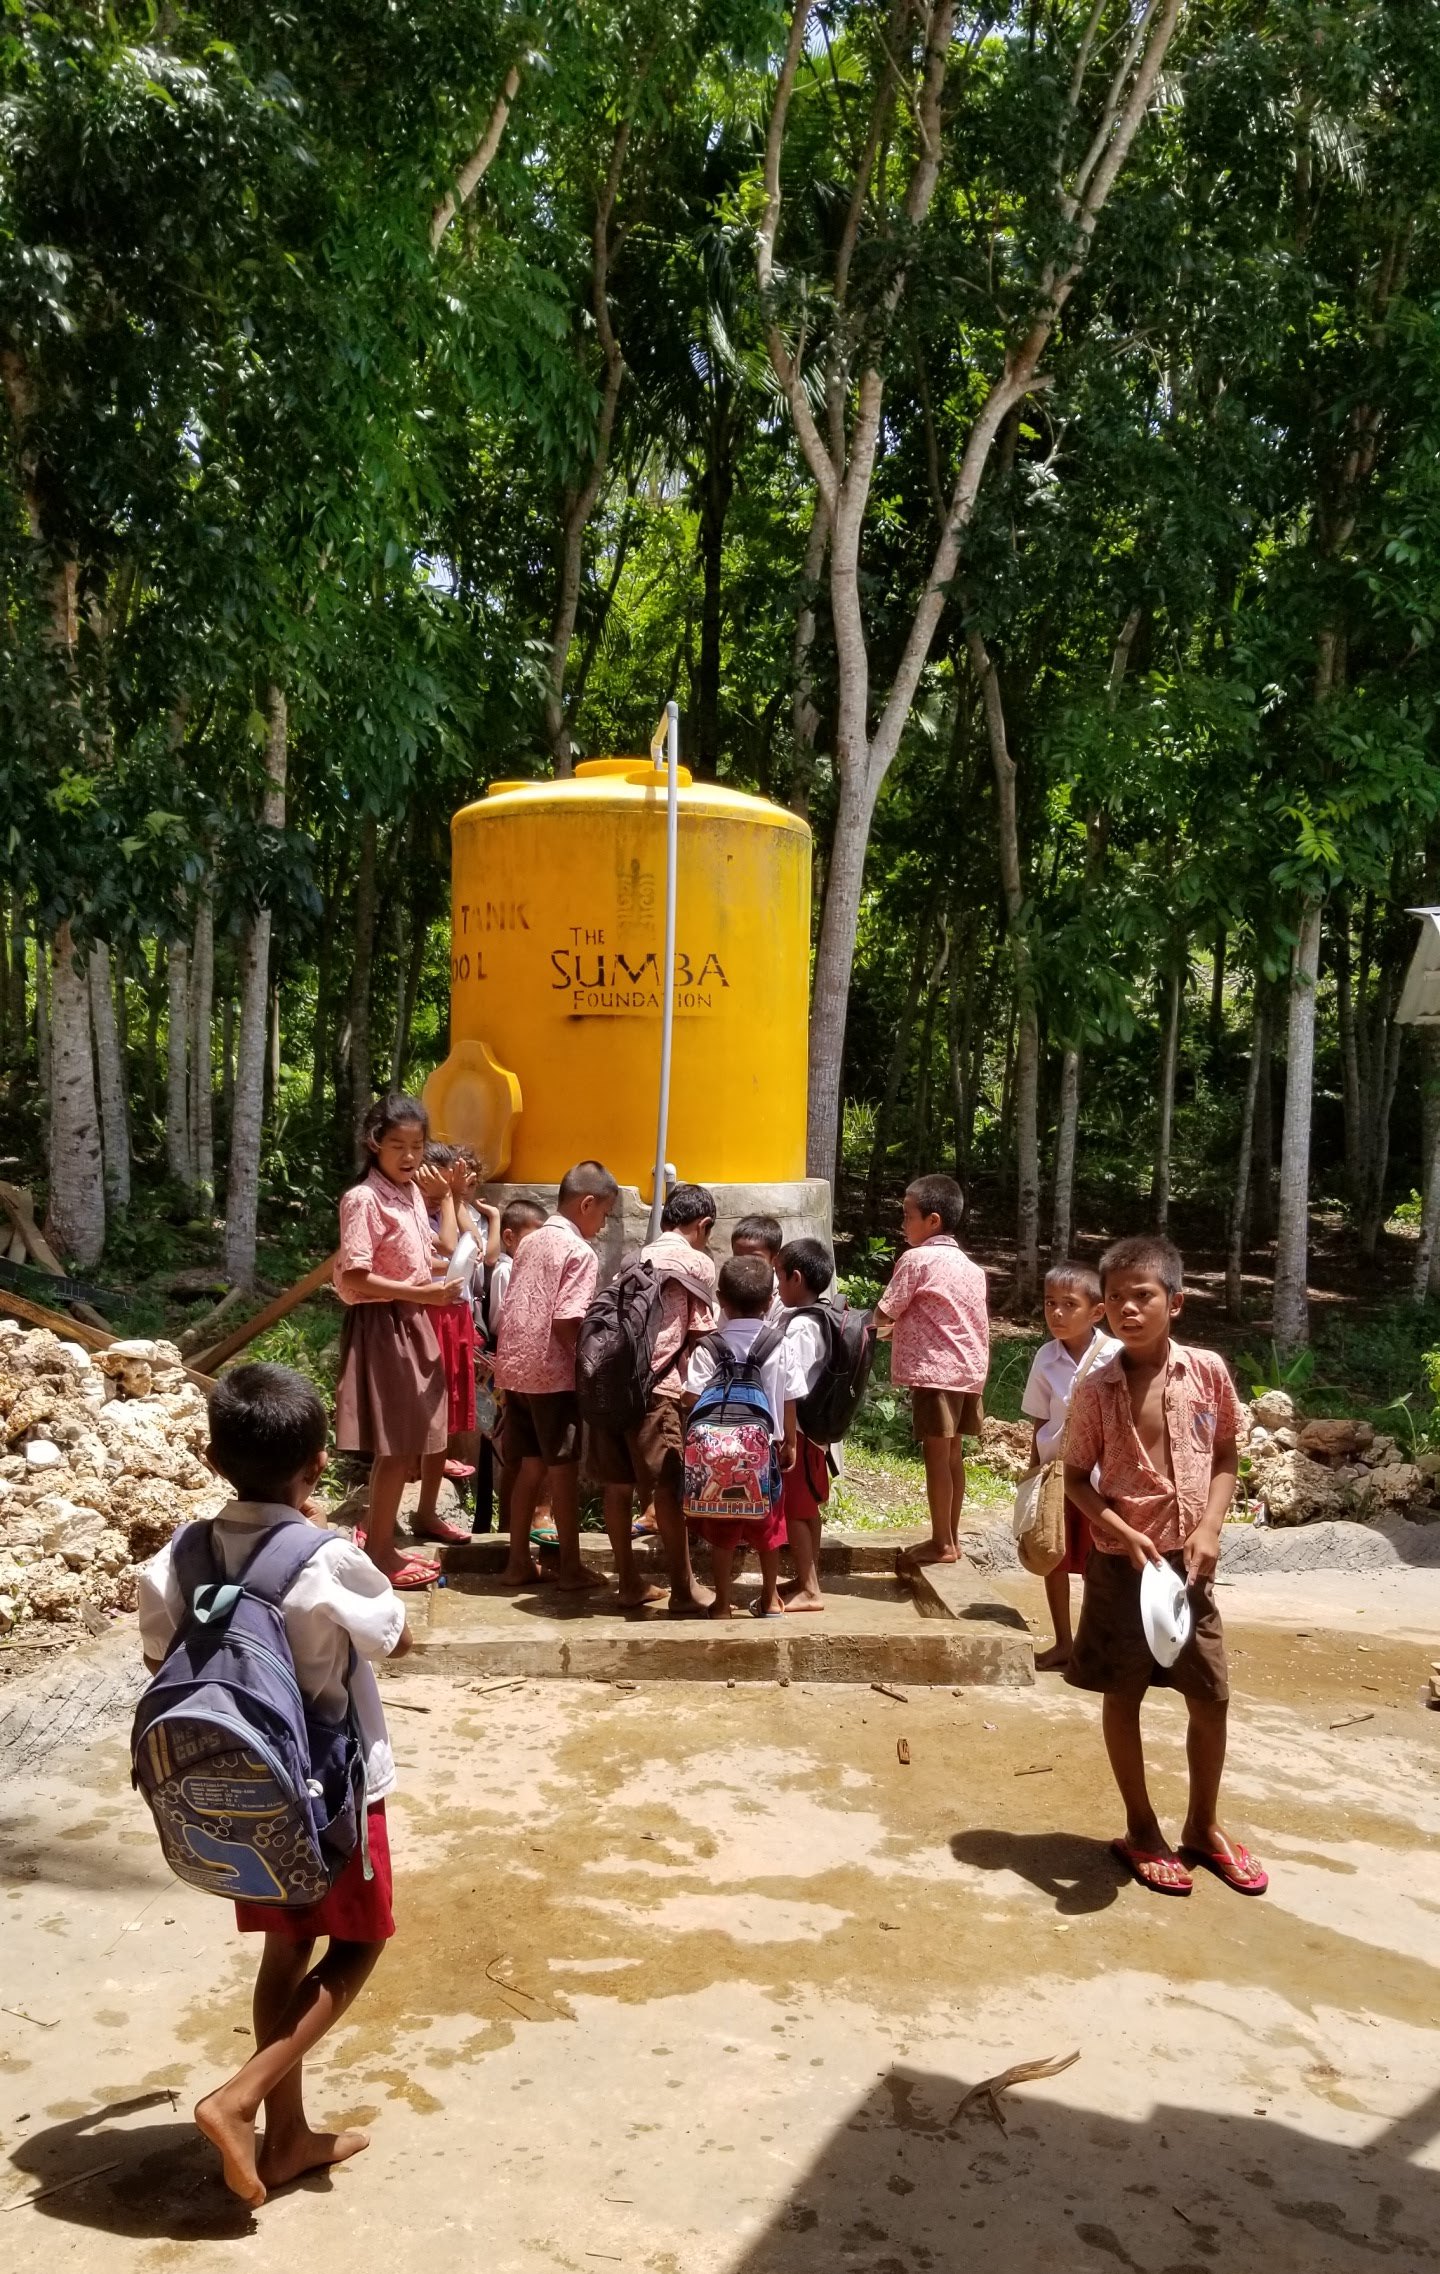 Sumba Foundation Water project